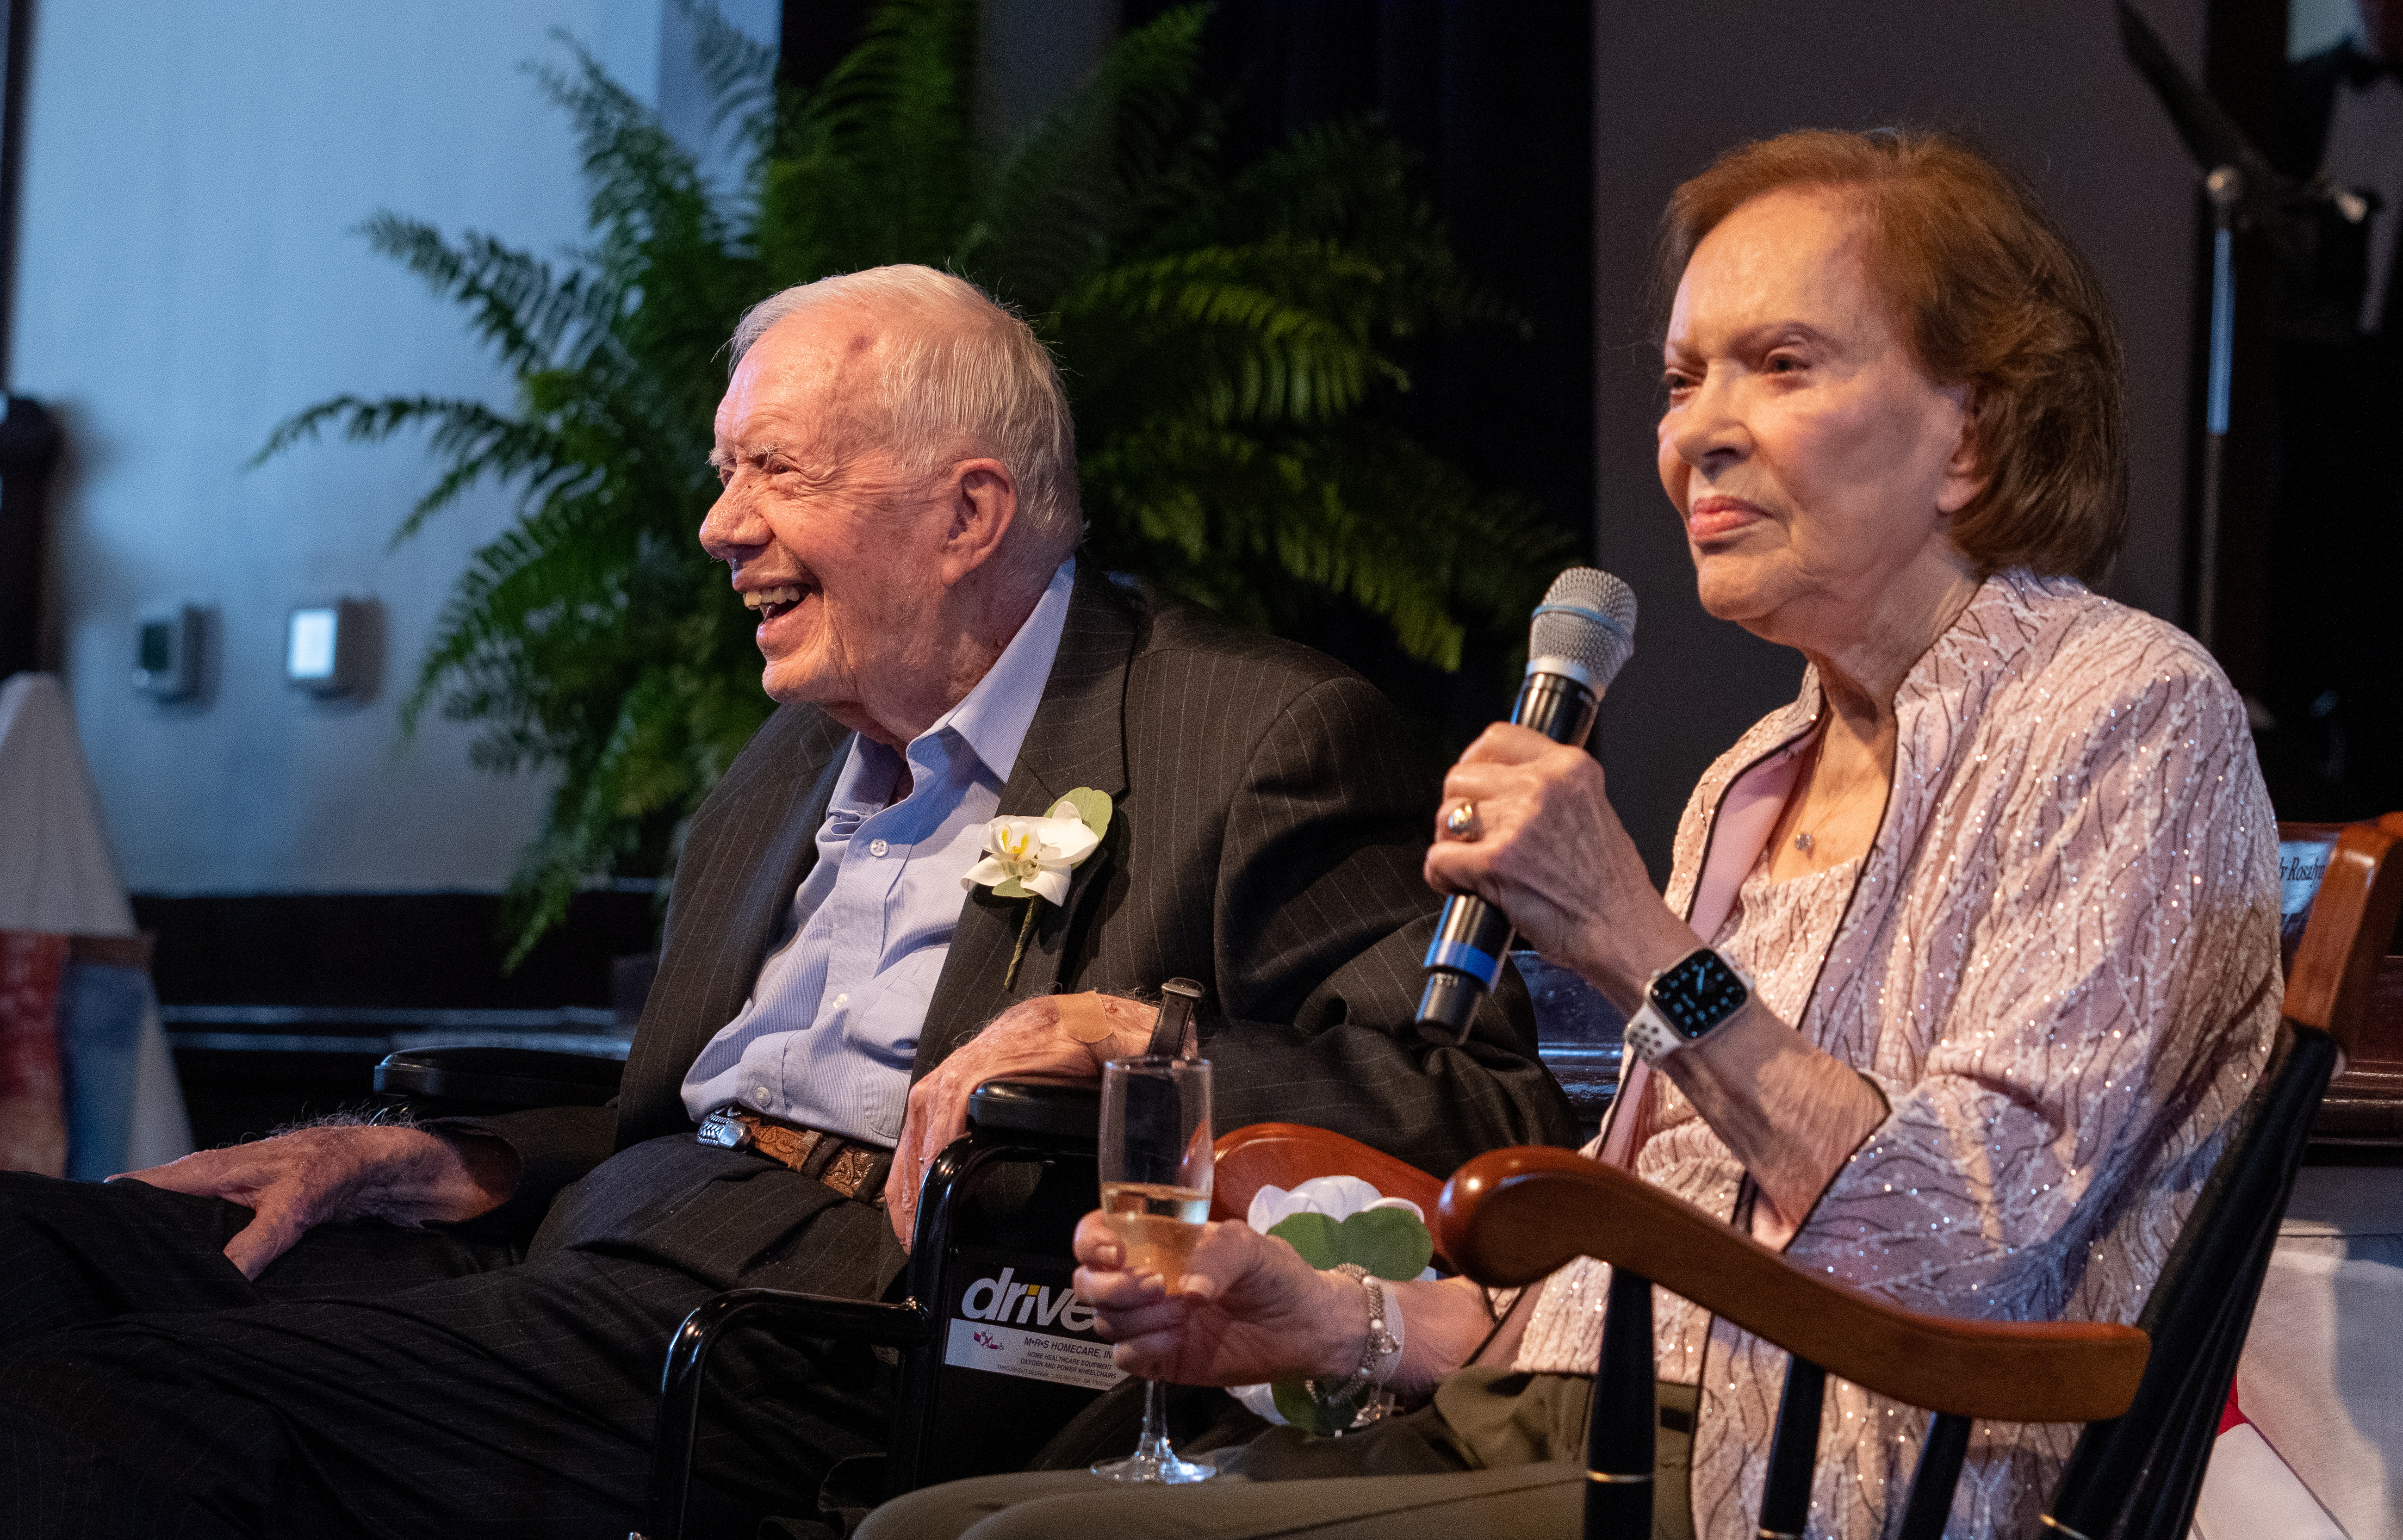 Former President Jimmy Carter and his wife Rosalynn celebrate their 75th wedding anniversary in Plains